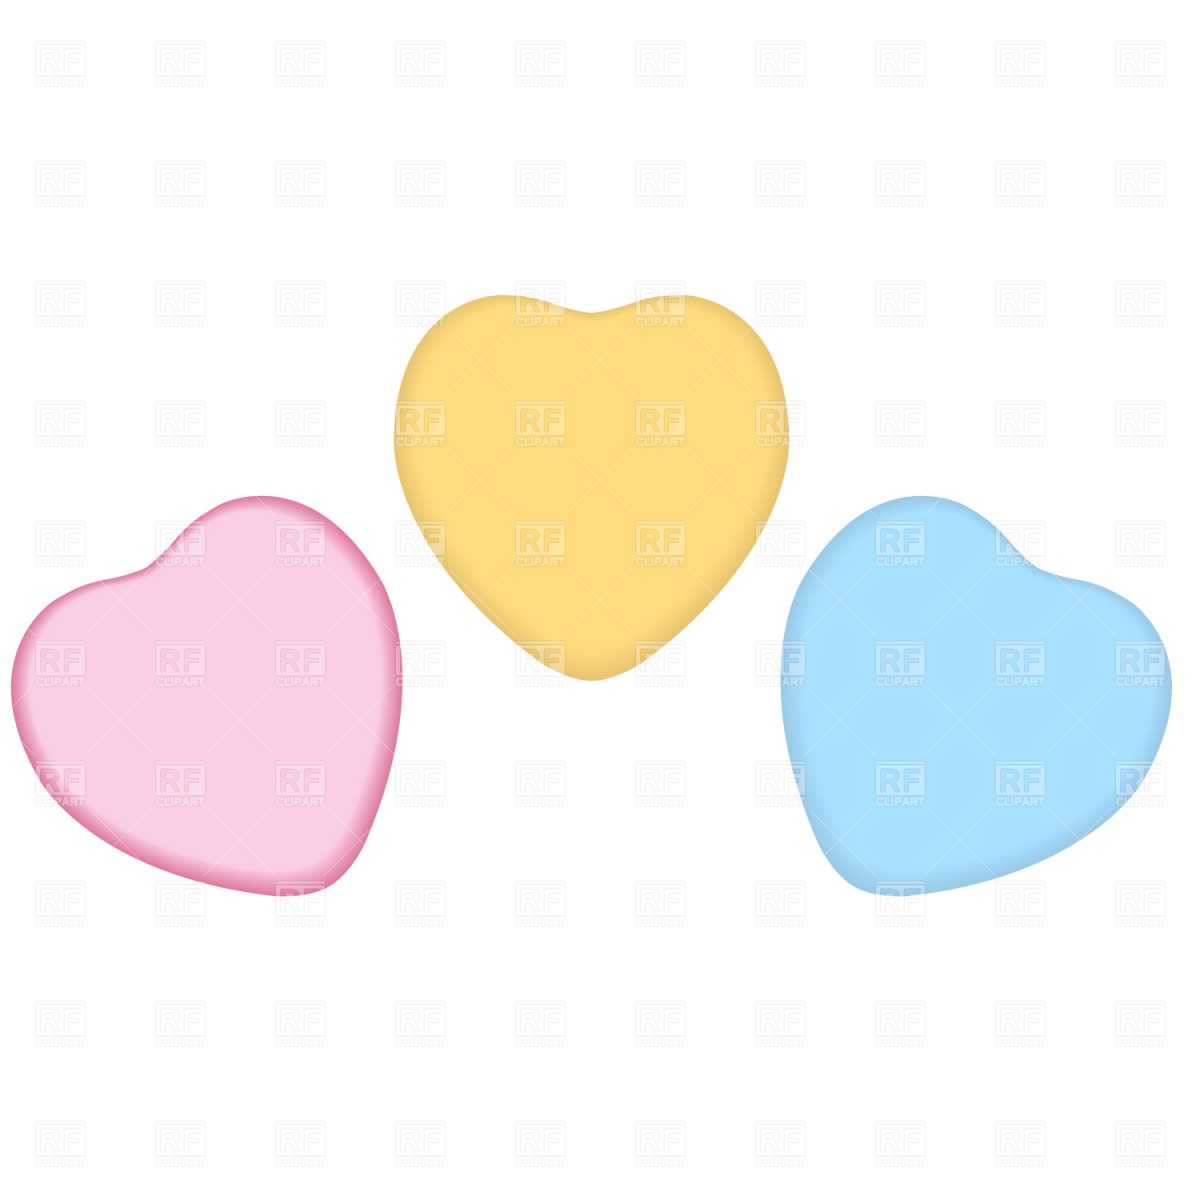 Food And Beverages   Candy Heart Download Royalty Free Vector Clipart